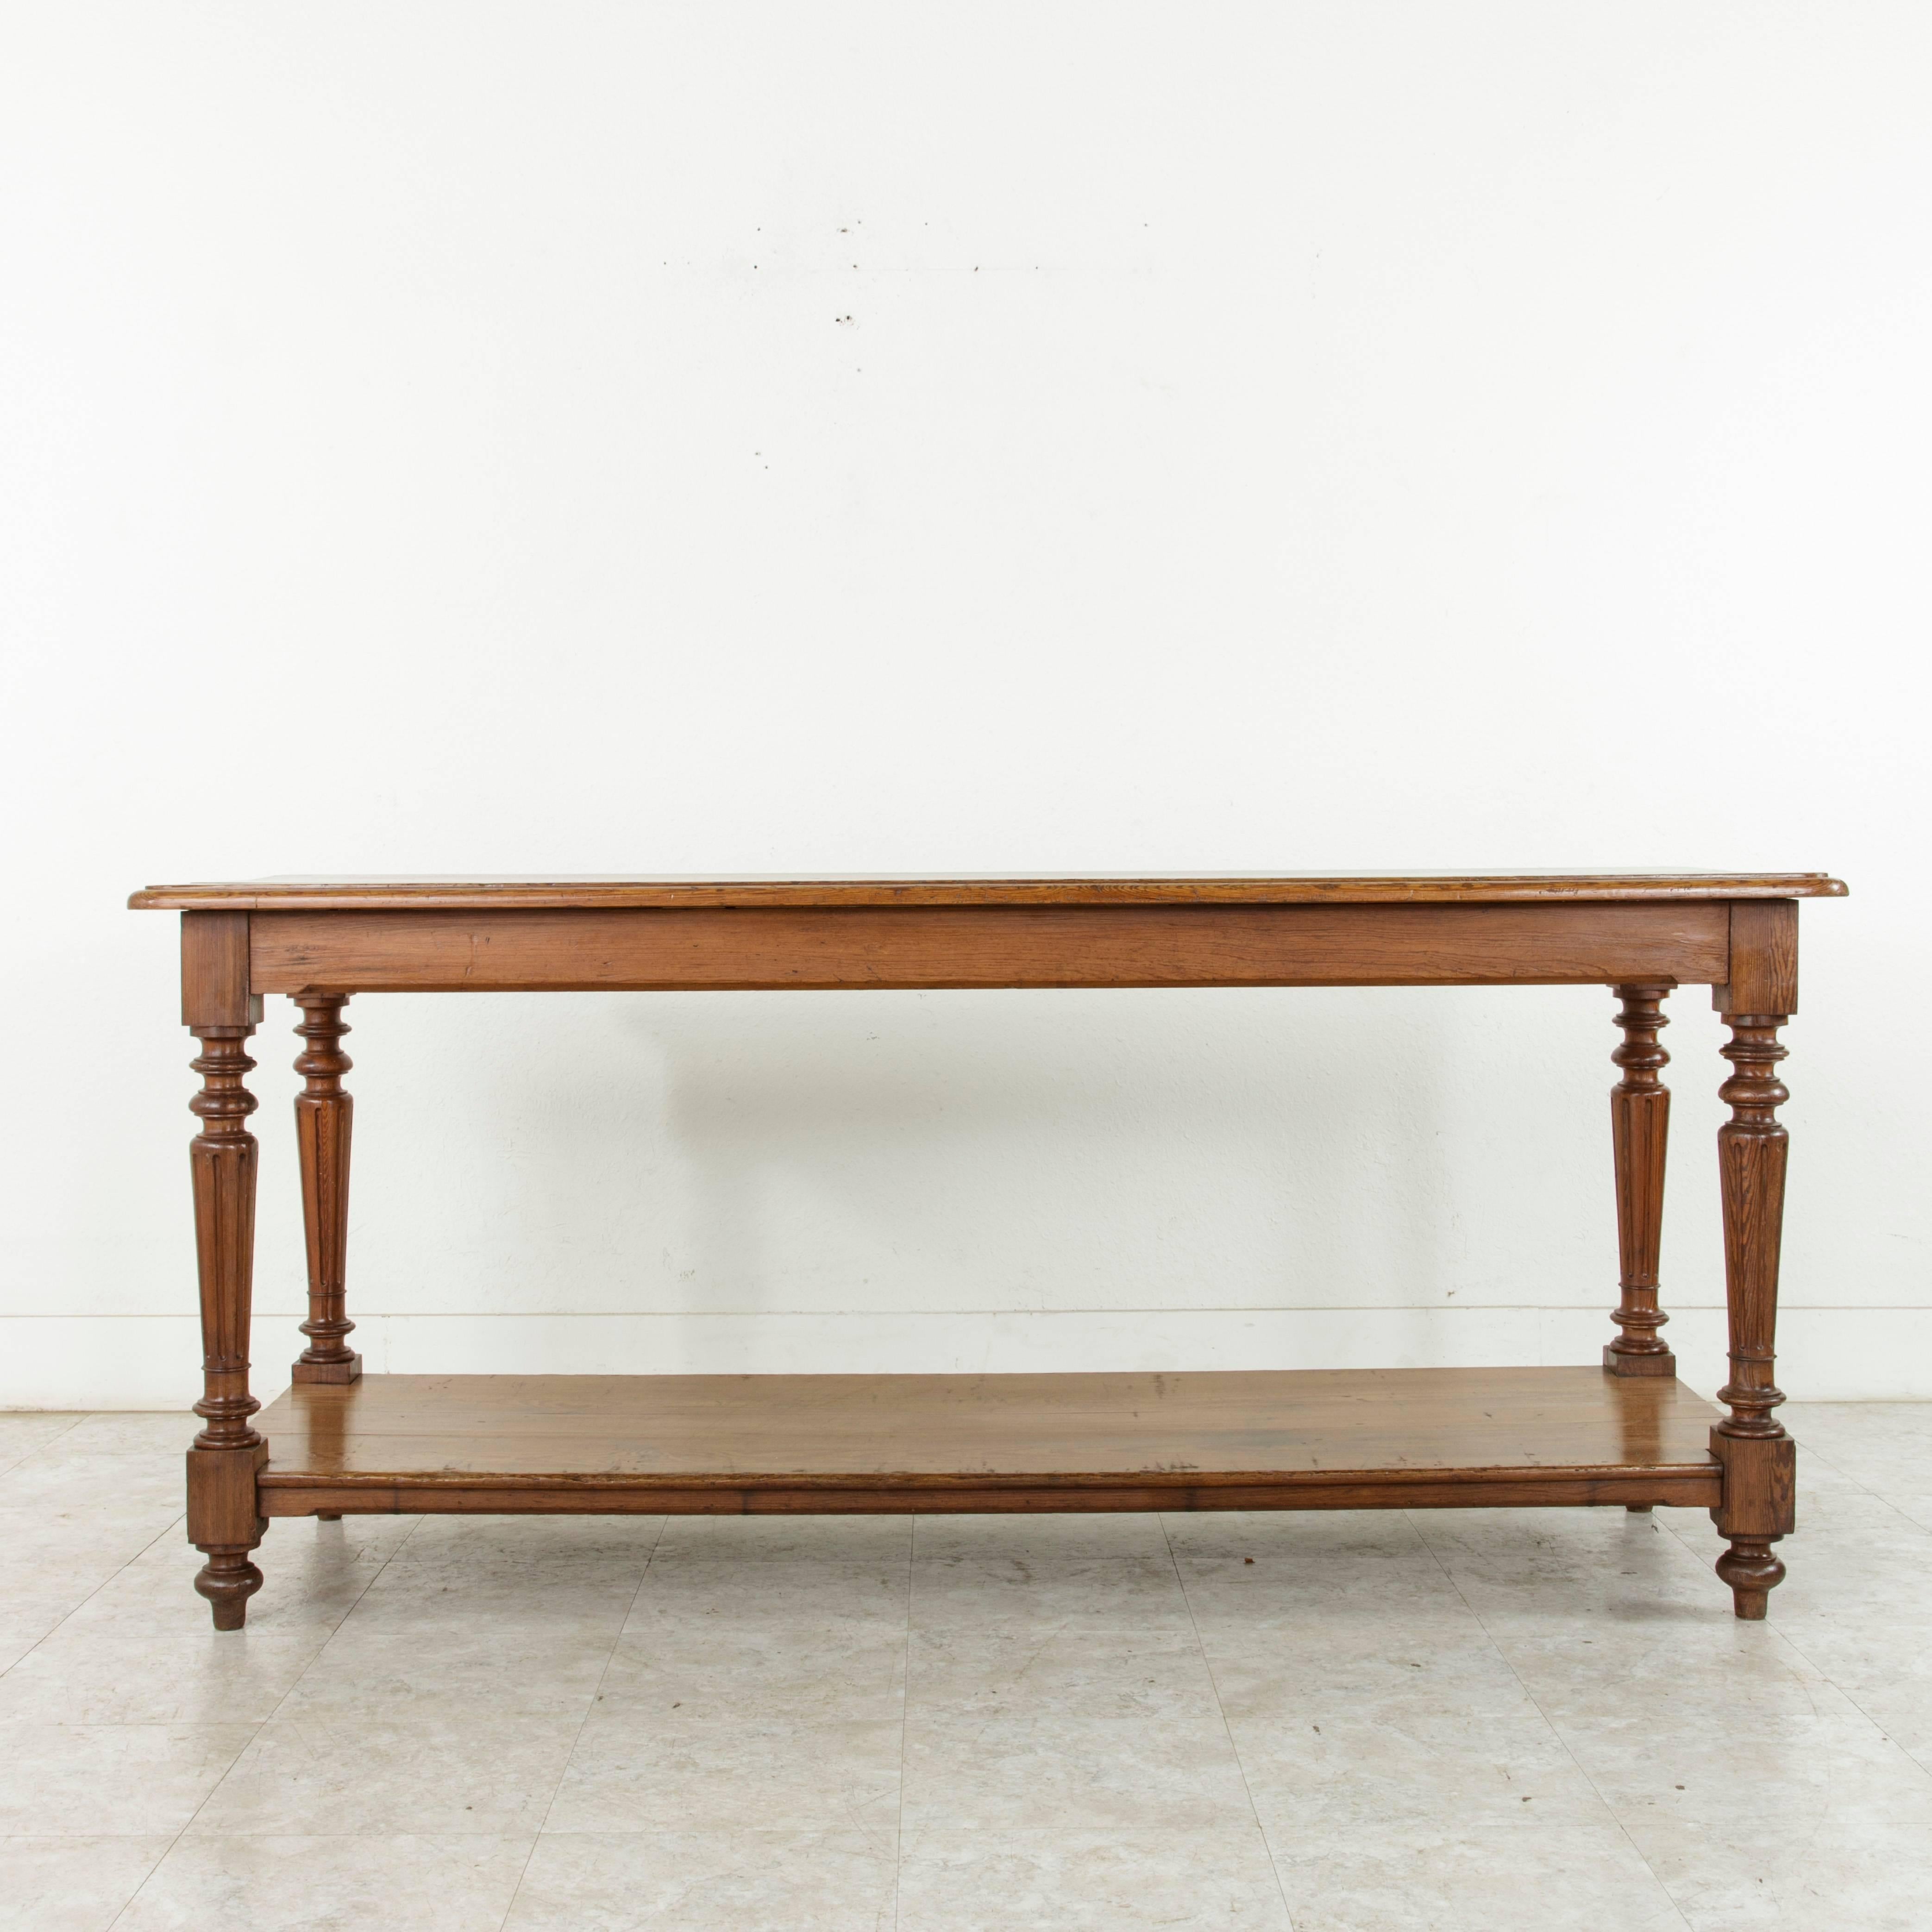 French Pitch Pine Draper's Table, Work Table, or Kitchen Island, circa 1900 1